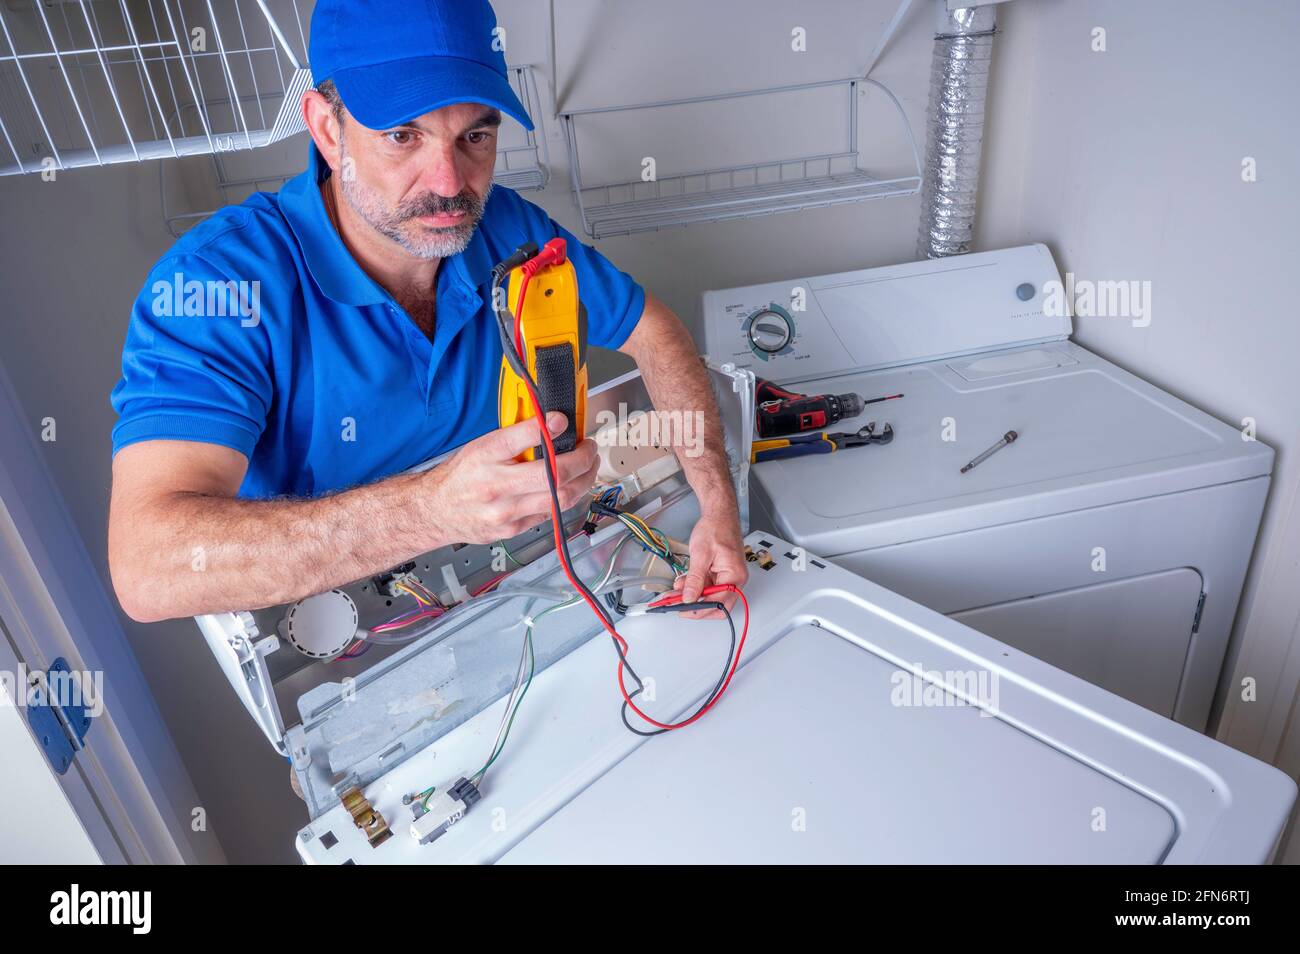 Appliance technician in uniform using a volt meter to troubleshoot a broken washing machine, looking at volt meter Stock Photo